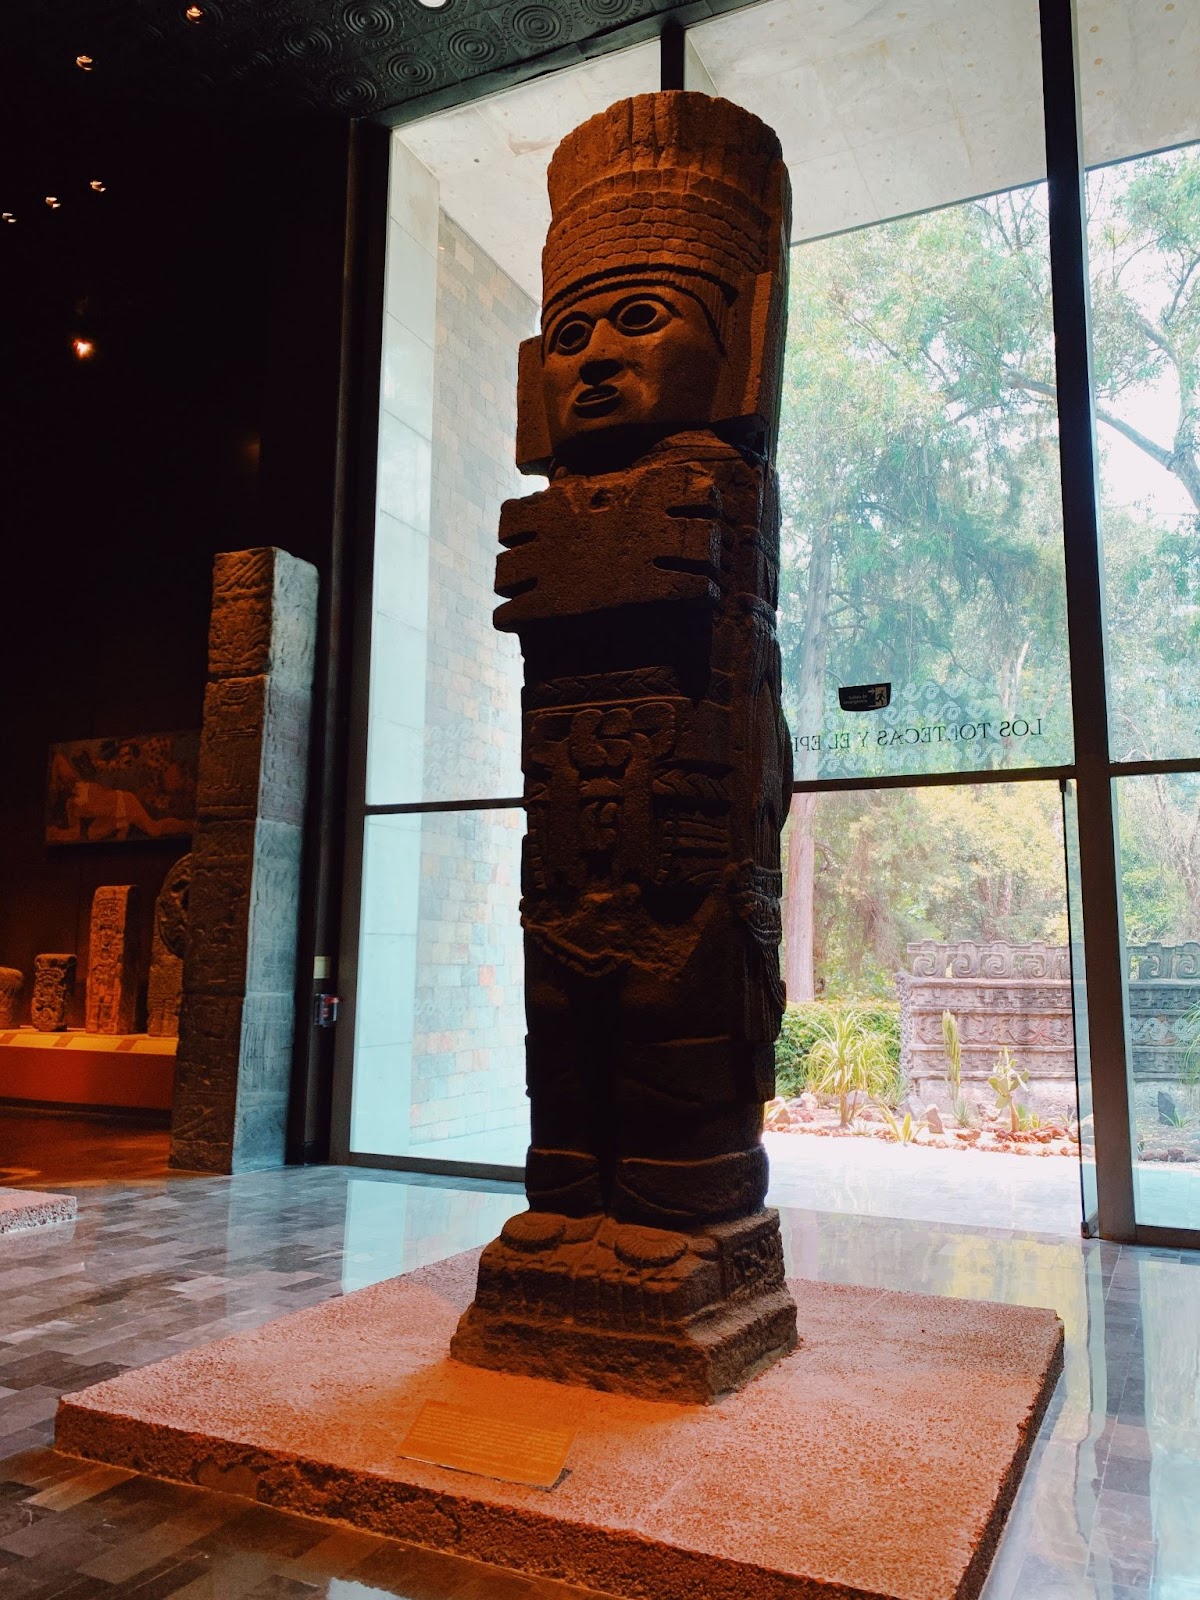 Atlantean Warrior sculpture found in Mexico City's National Anthropology Museum